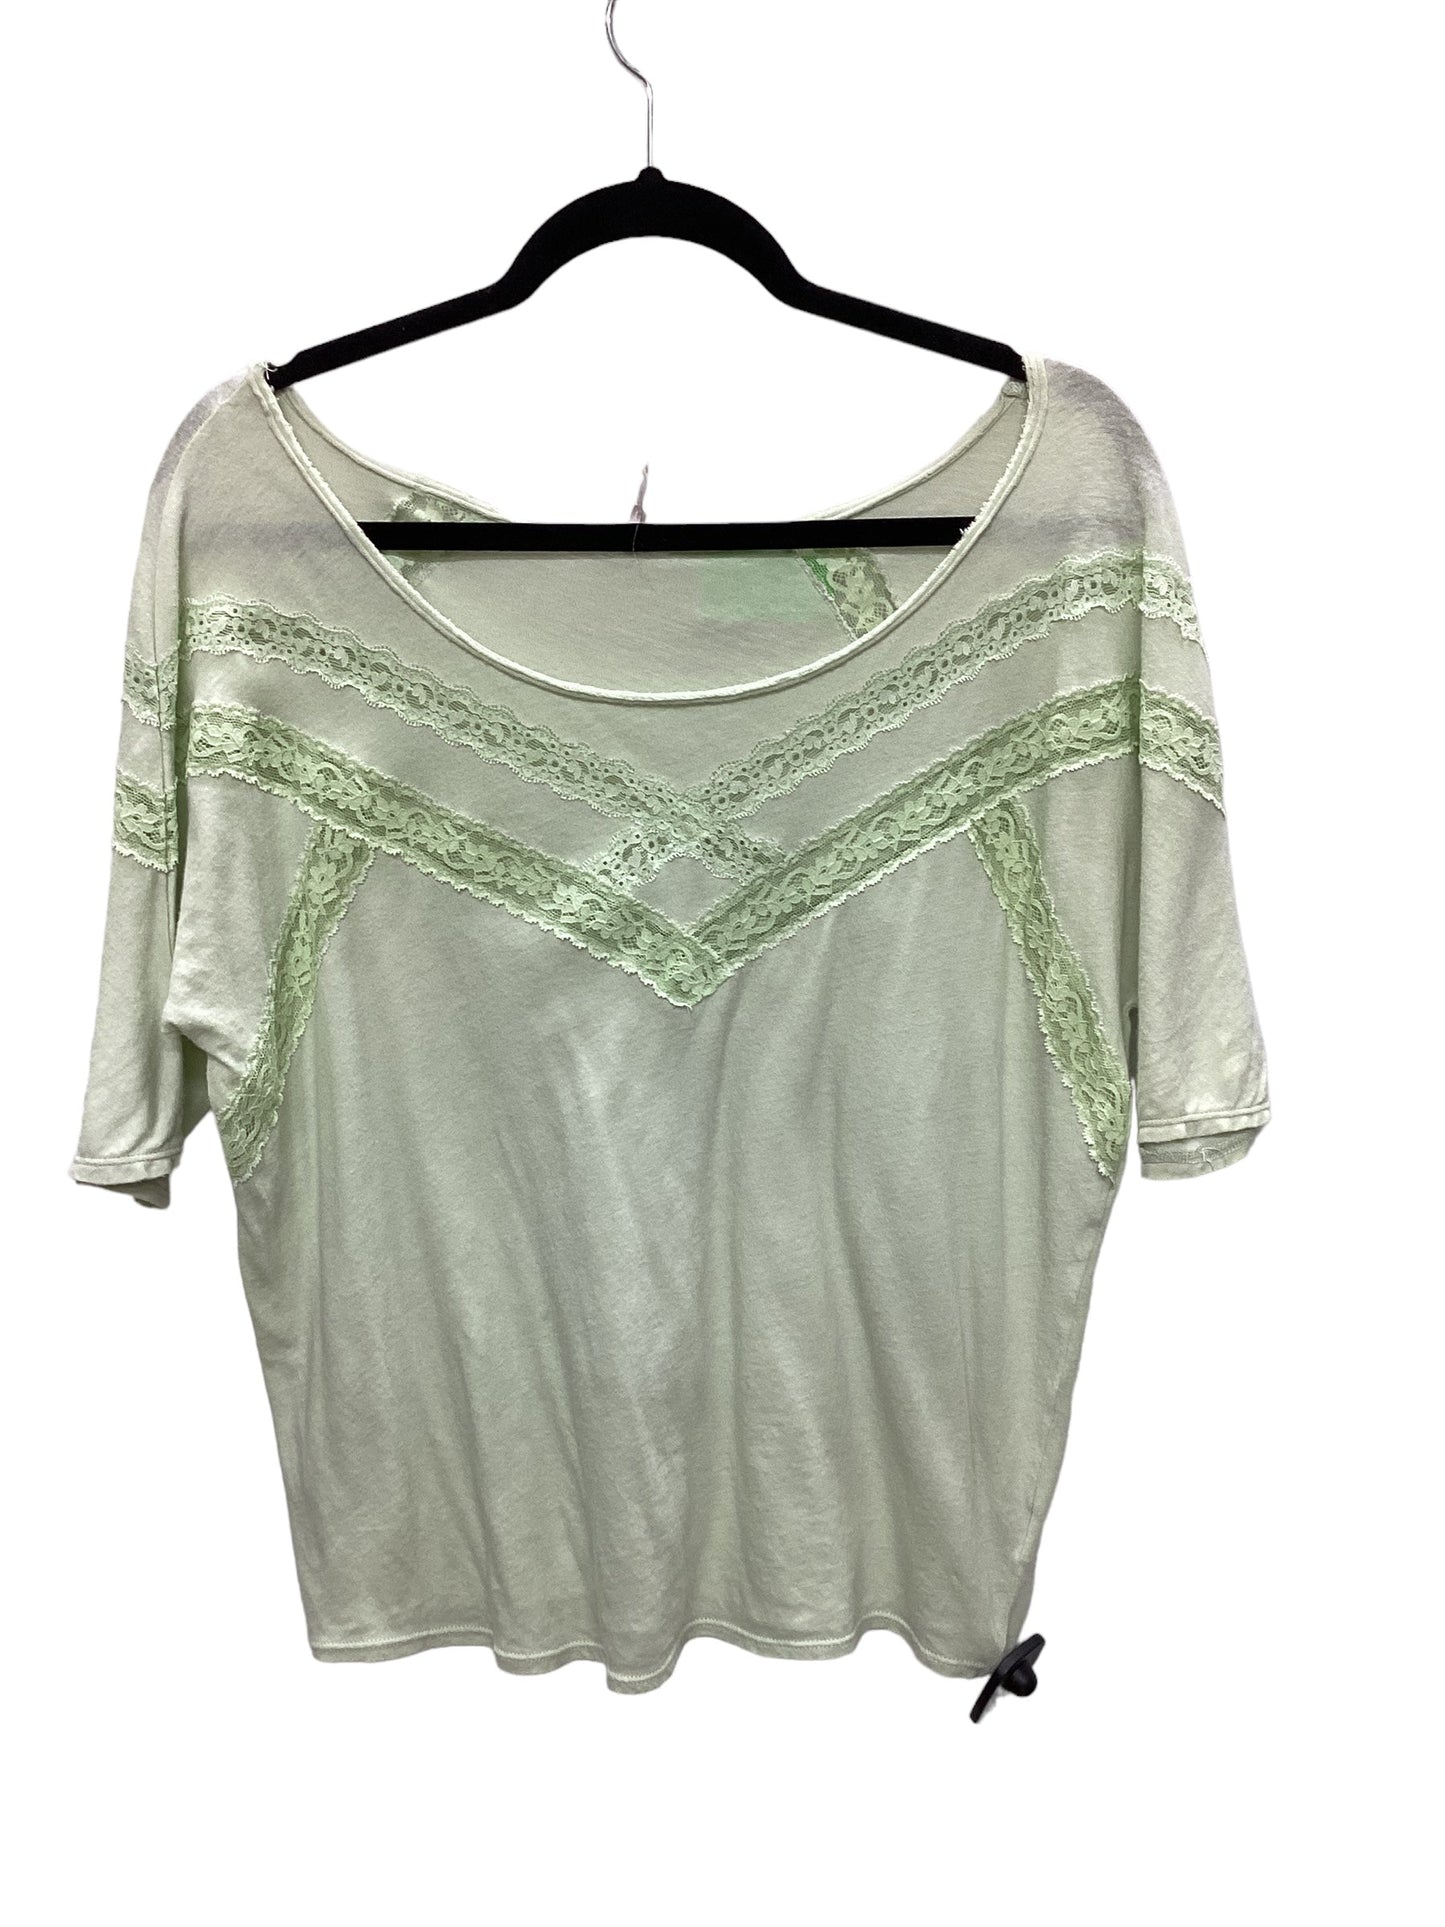 Green Top Short Sleeve Free People, Size S